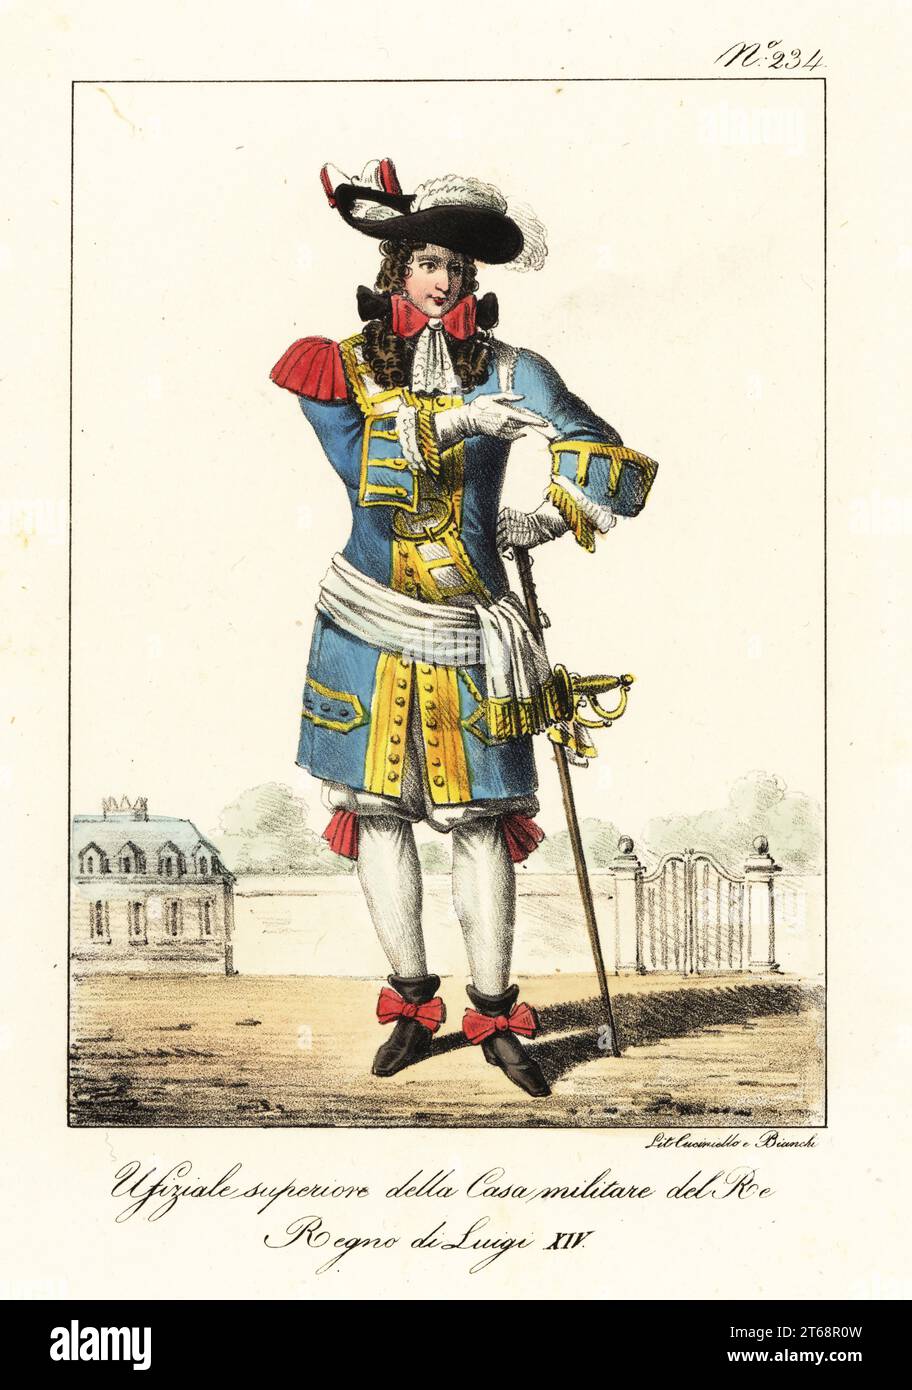 Uniform of a Superior Officer in the French Military Household of the King of France, reign of King Louis XIV. Plumed hat, blue coat with epaulette and gold frogging, cravatte with ribbons, pantalons, hose, ribbon bootlets, armed with sword and staff. Officier superieur de la Maison Militaire du Roi. Regne de Louis XIV. Handcoloured lithograph by Lorenzo Bianchi and Domenico Cuciniello after Hippolyte Lecomte from Costumi civili e militari della monarchia francese dal 1200 al 1820, Naples, 1825. Italian edition of Lecomtes Civilian and military costumes of the French monarchy from 1200 to 1820 Stock Photo